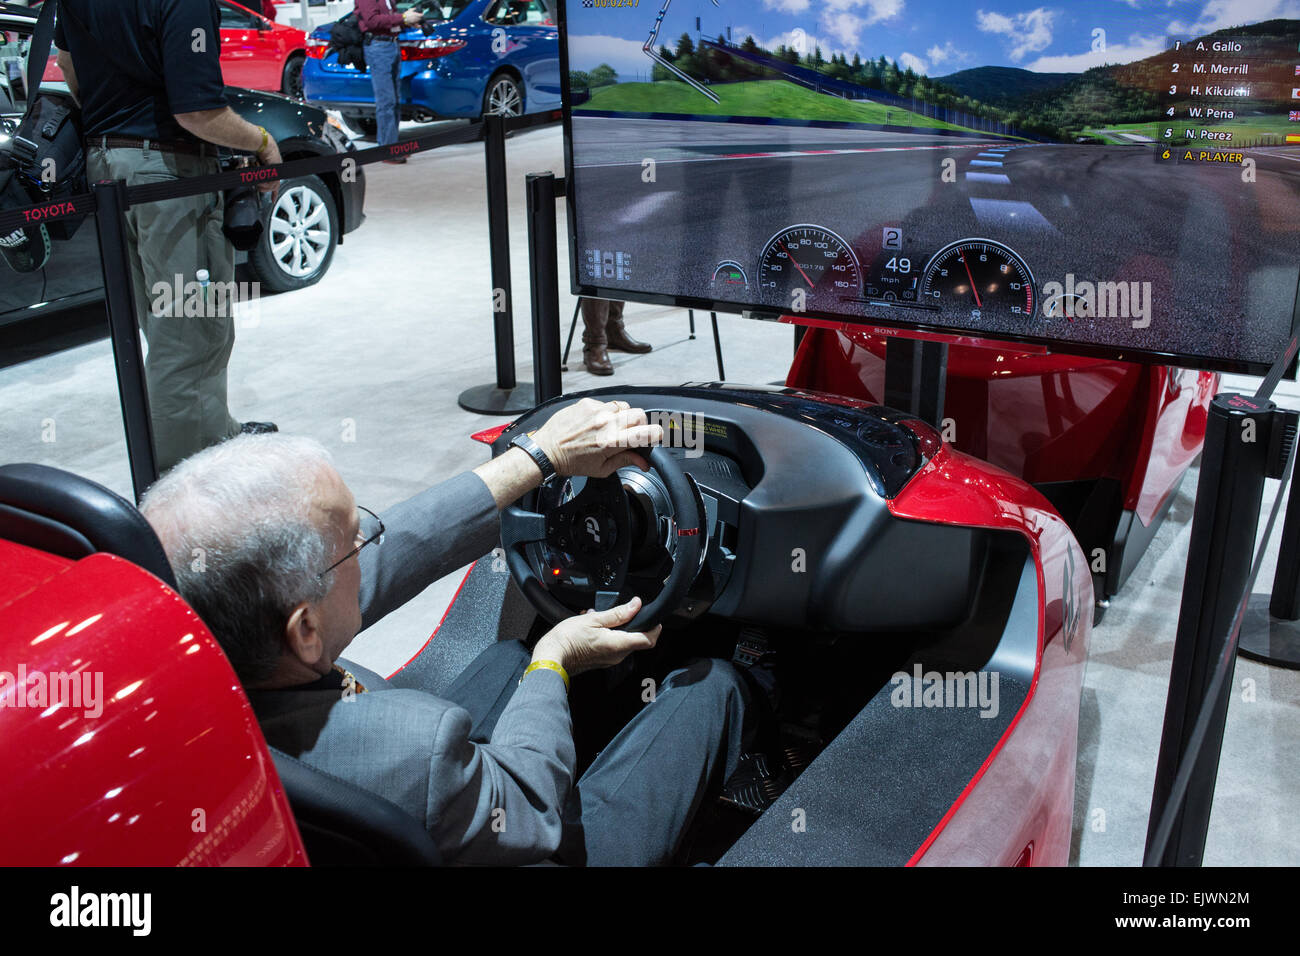 New York, NY - 1 April 2015. A visitor to the New York International Auto Show tries driving the Toytoa FT-1 simulator. The FT-1 is a concept car designed for track use. Credit:  Ed Lefkowicz/Alamy Live News Stock Photo